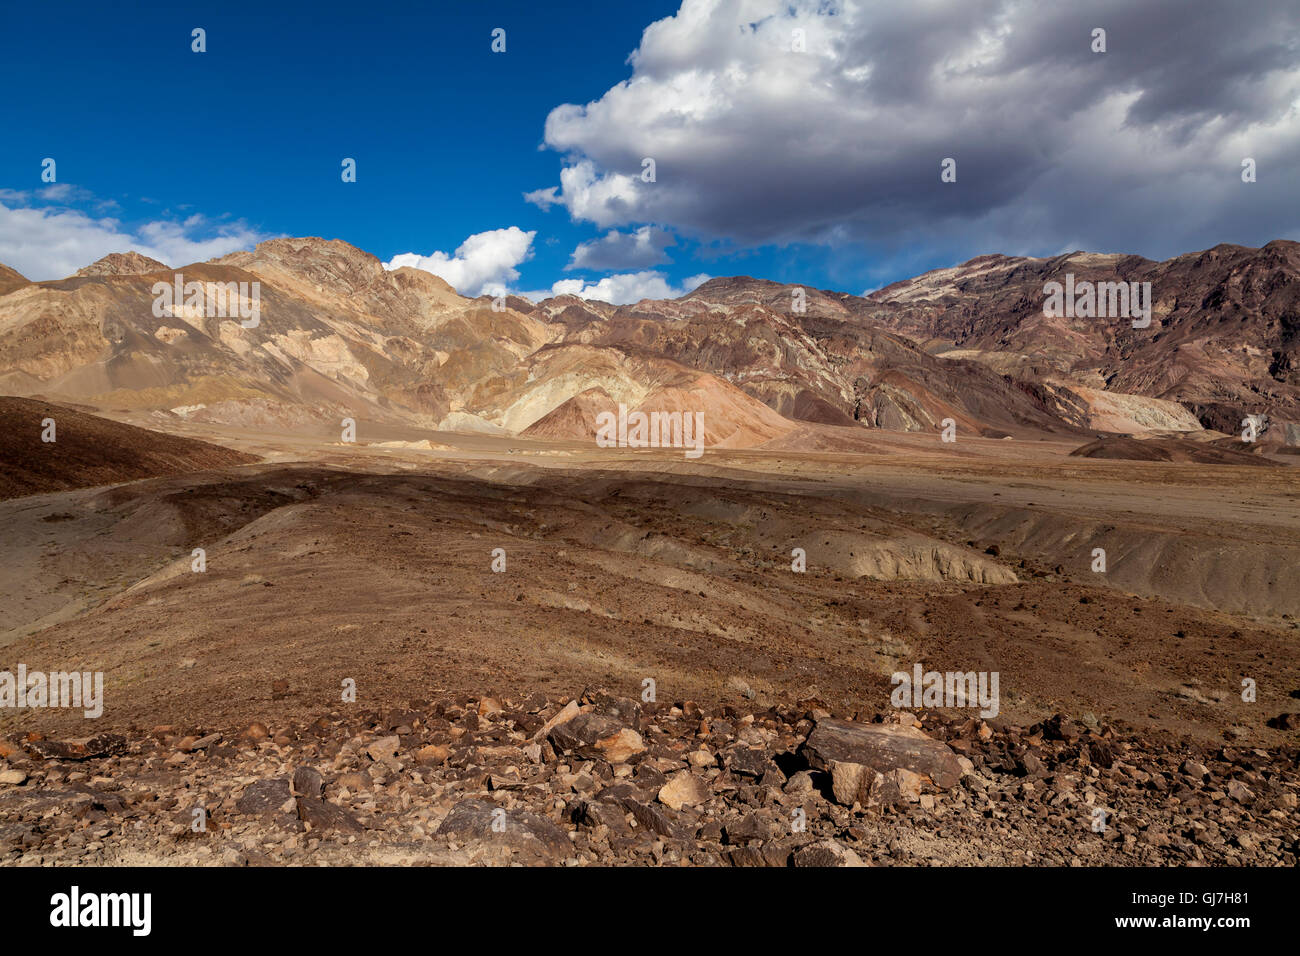 Volcanic and sedimentary hills near Artist's Palette in Death Valley National Park, California, USA Stock Photo